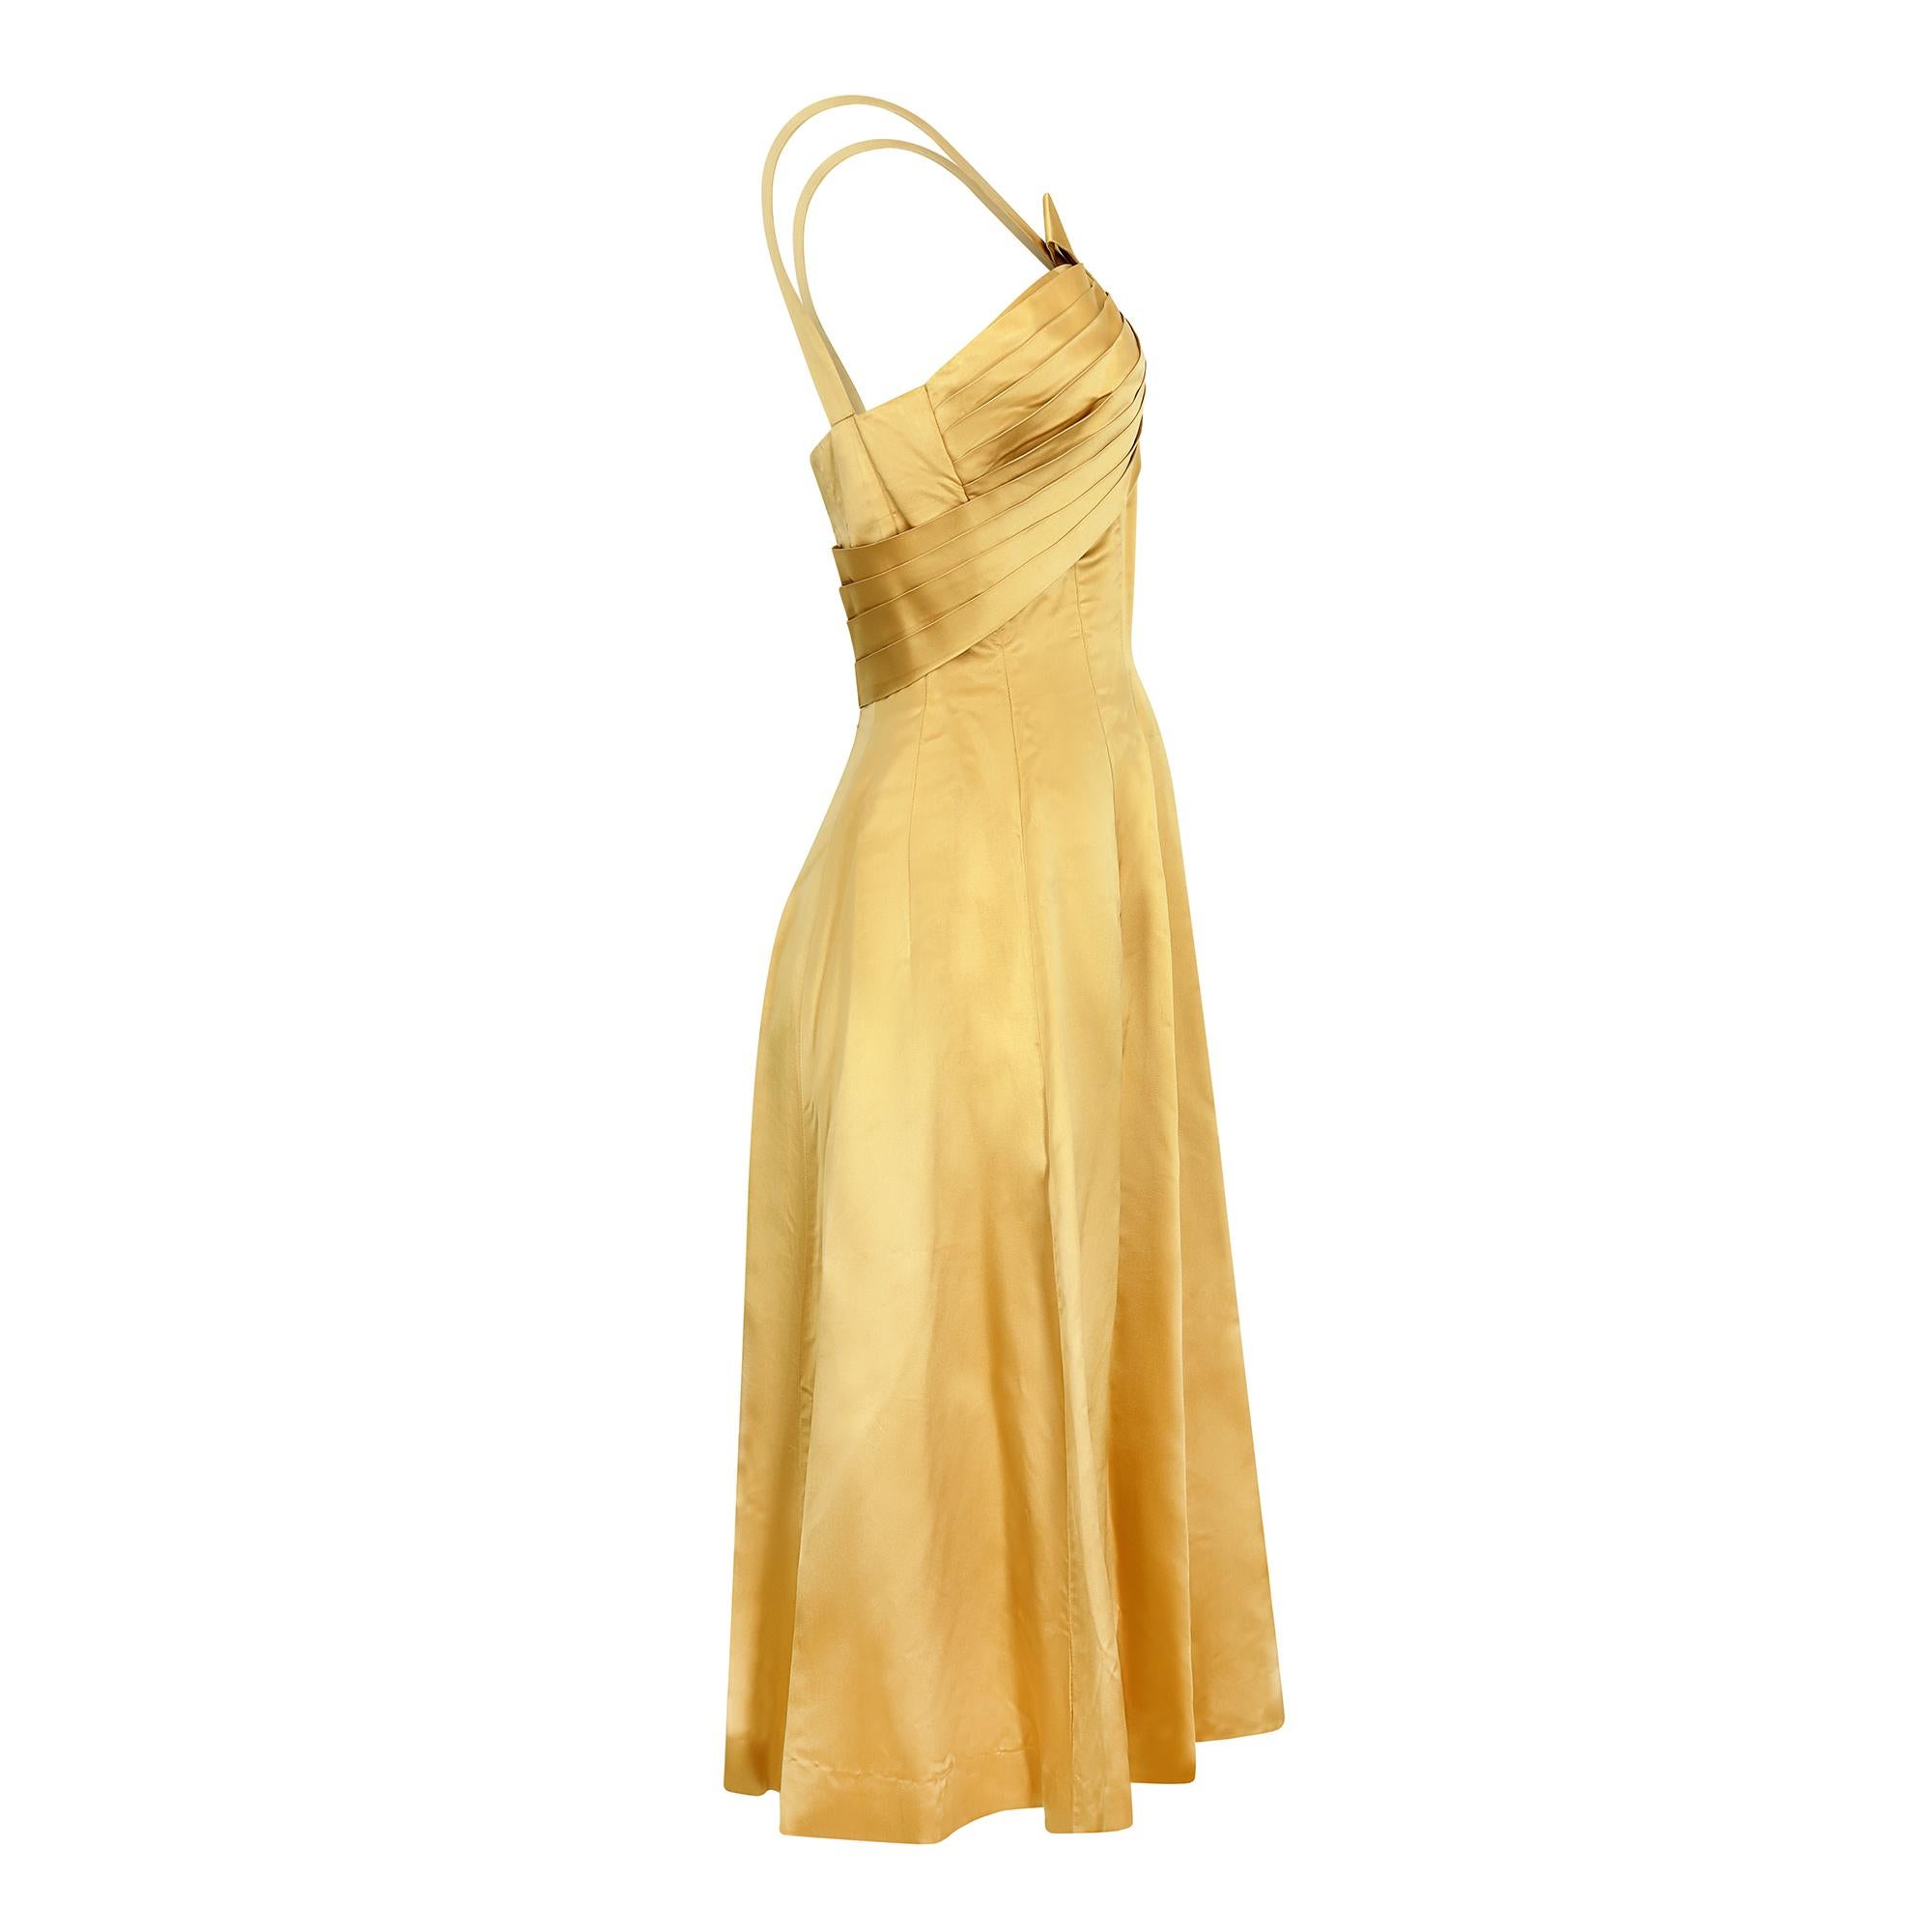 A highly desirable, original, 1950s cocktail dress which could easily be worn as an alternative wedding dress. The fabric is a beautiful gold coloured silk satin and the dress features a well executed pleated bodice with an asymmetric bow with long